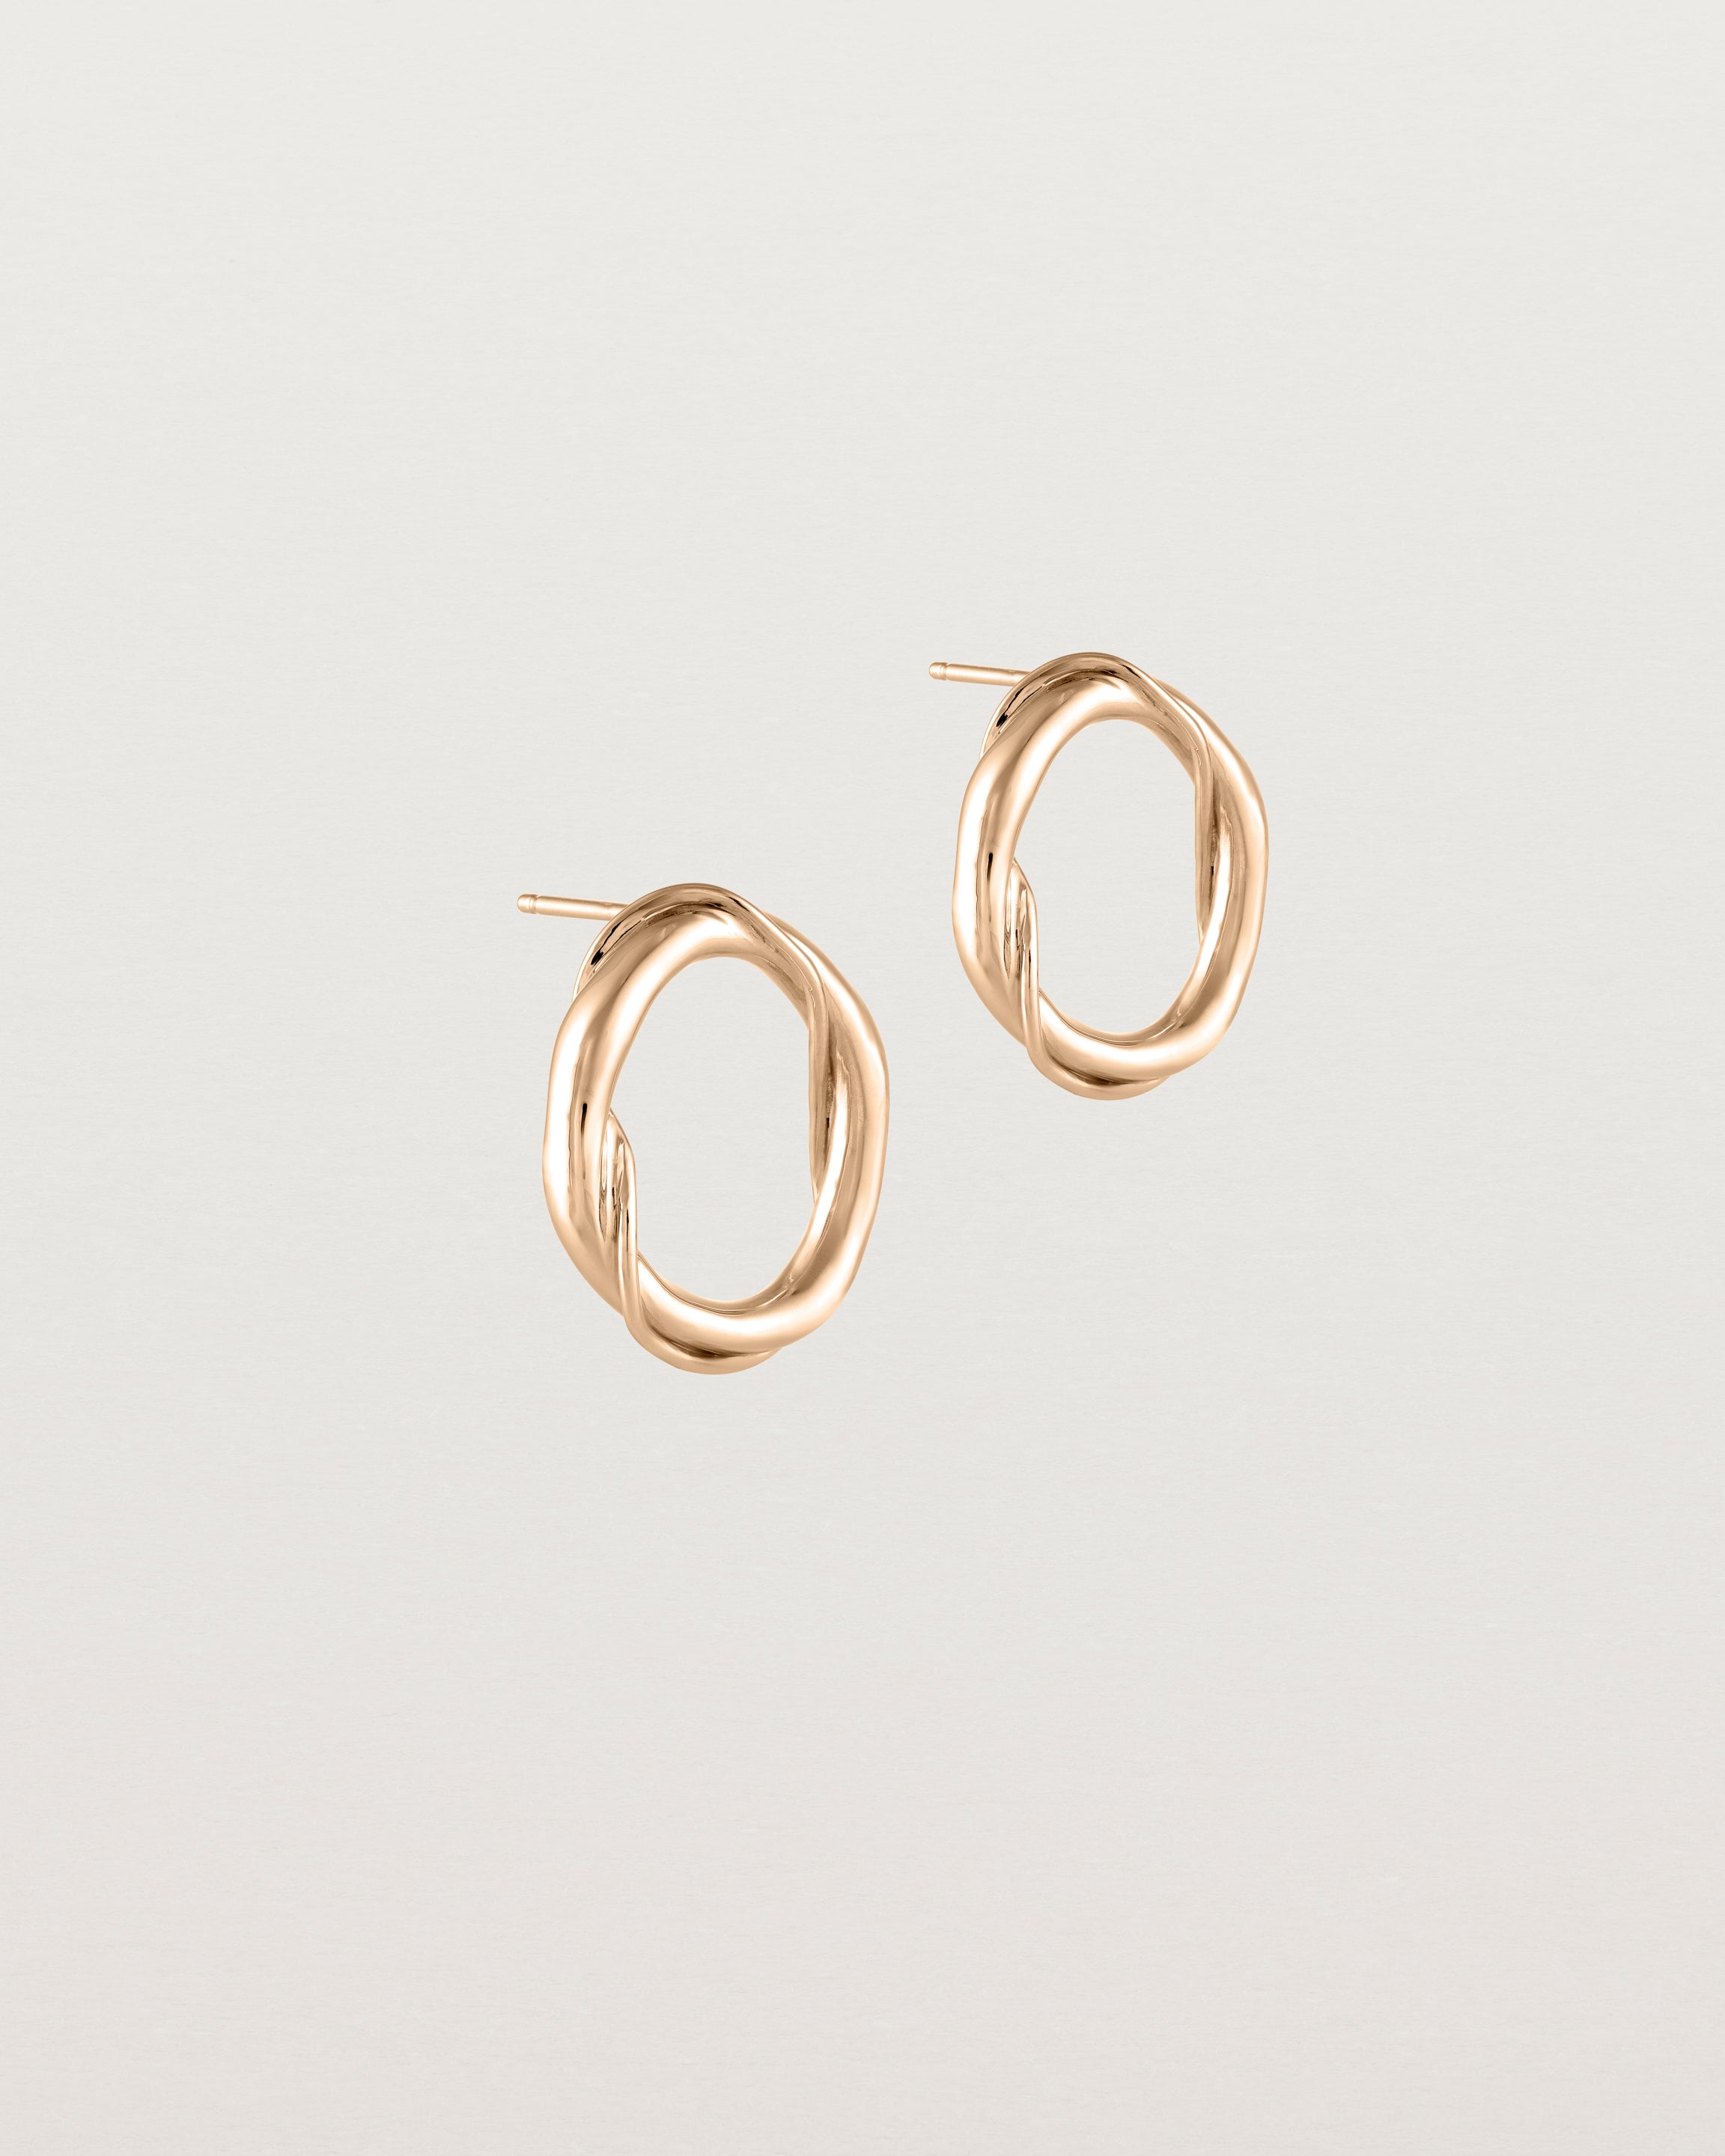 Angled view of the Petite Dalí Earrings in rose gold.